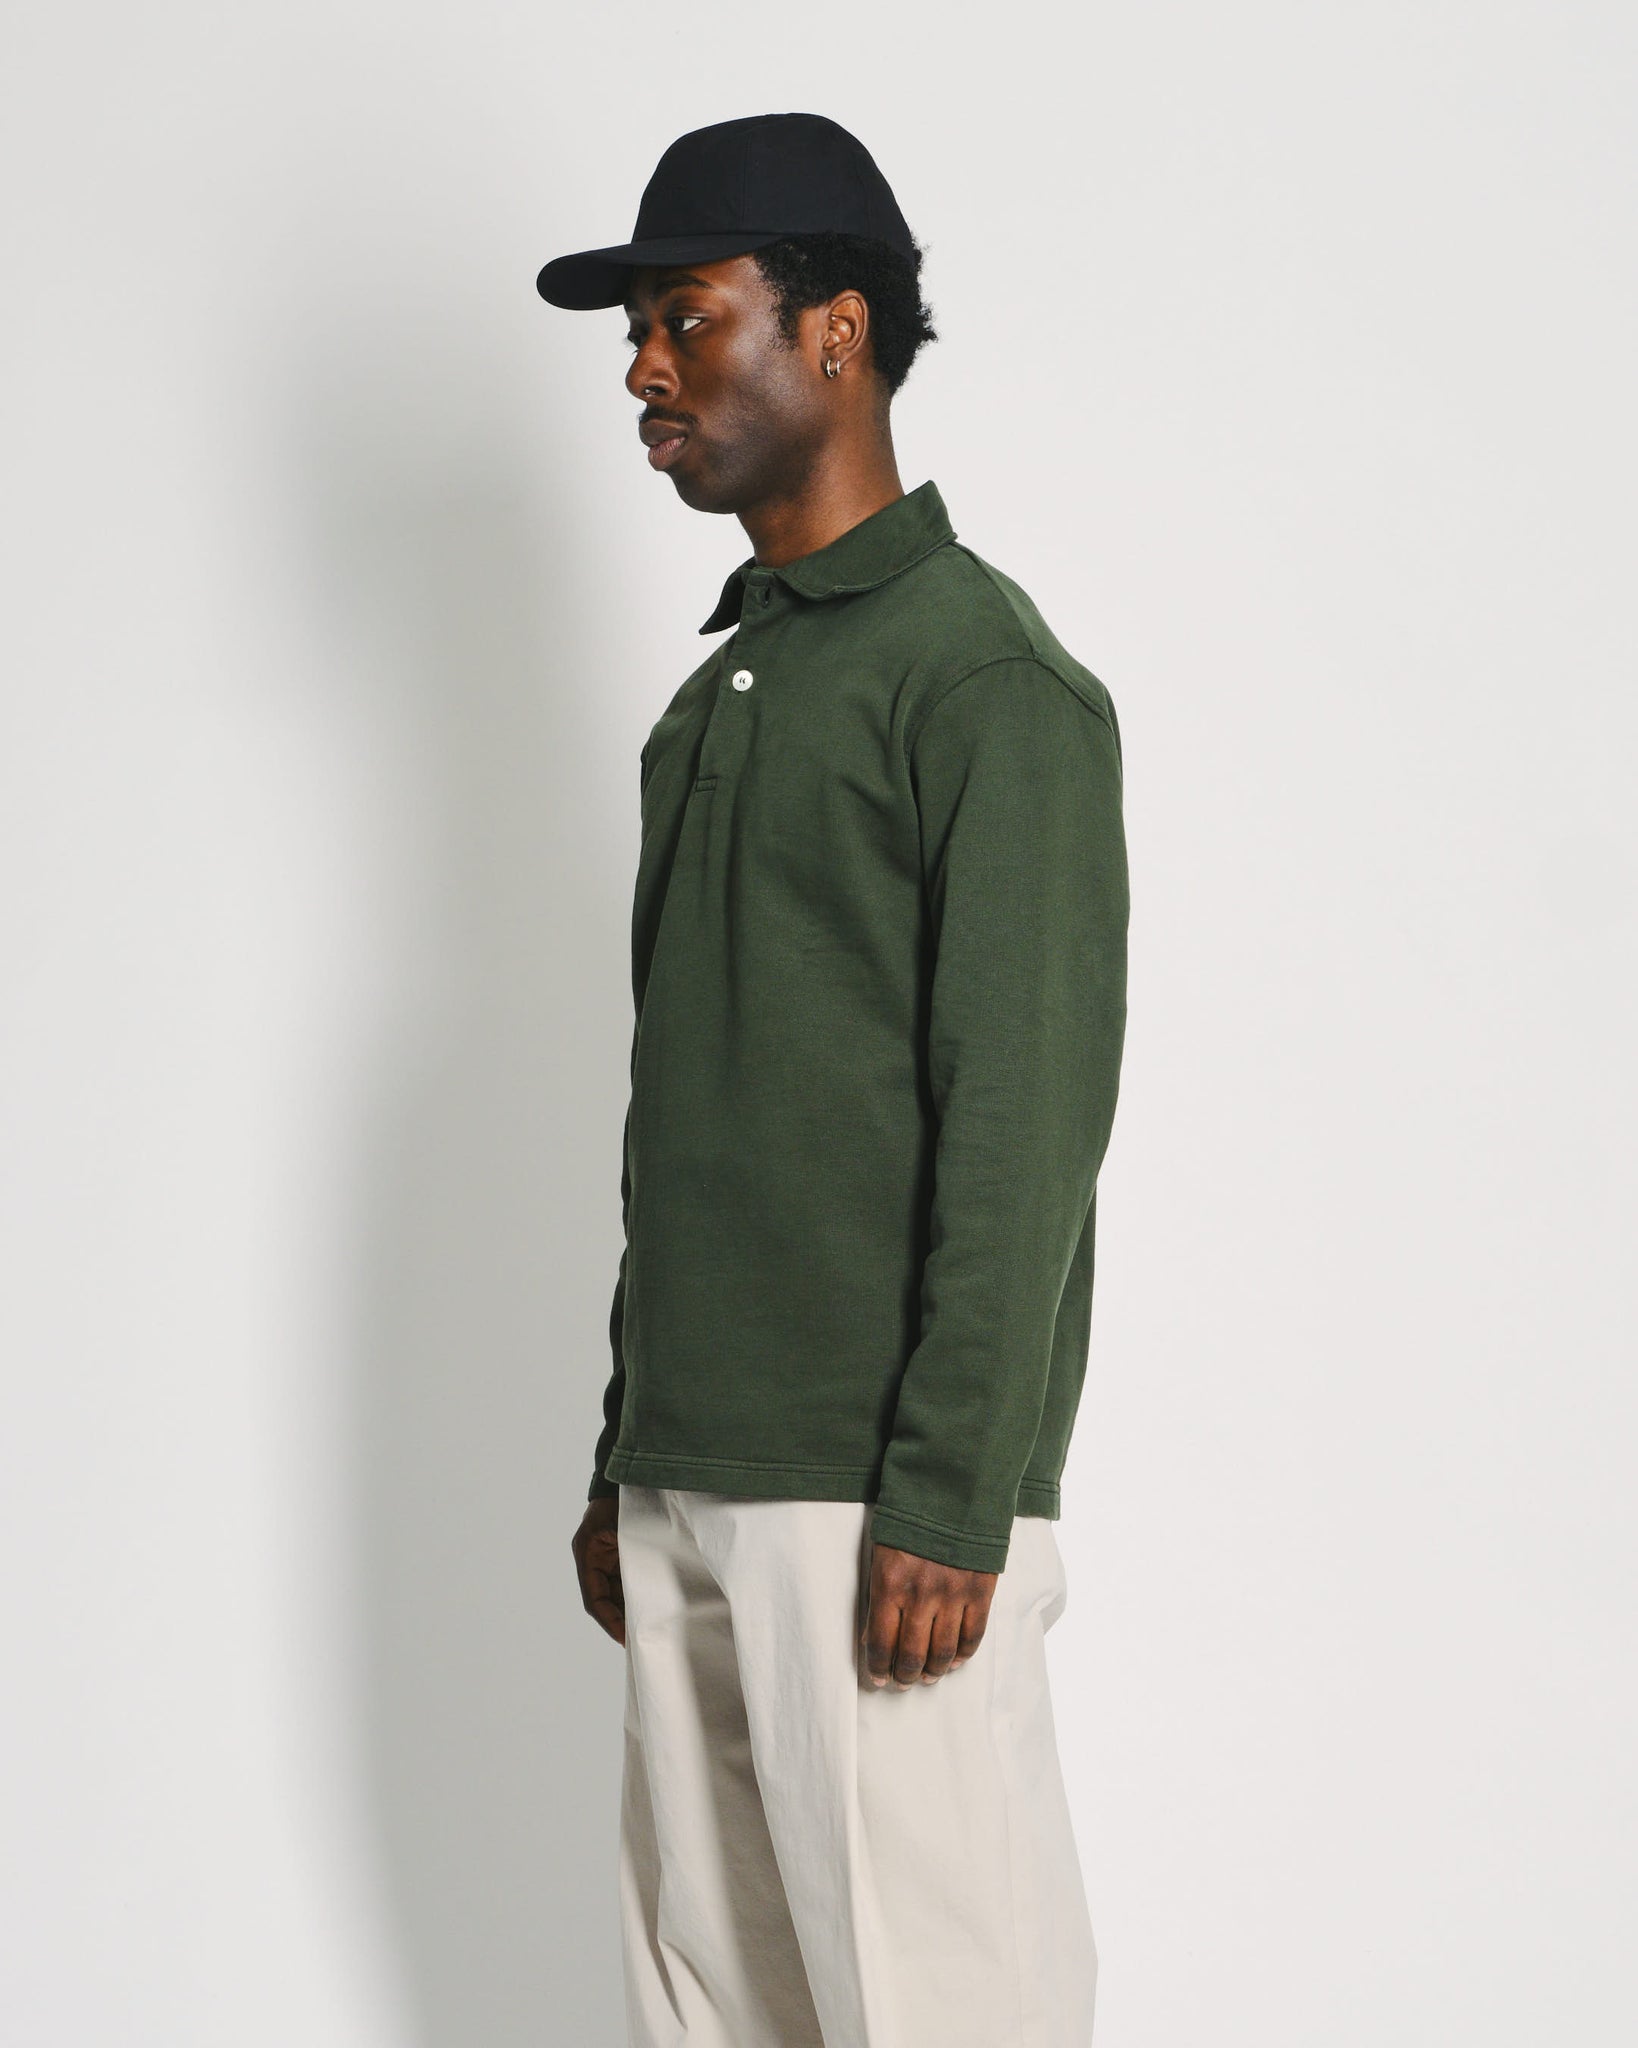 Another Polo Shirt 1.0 - Evergreen